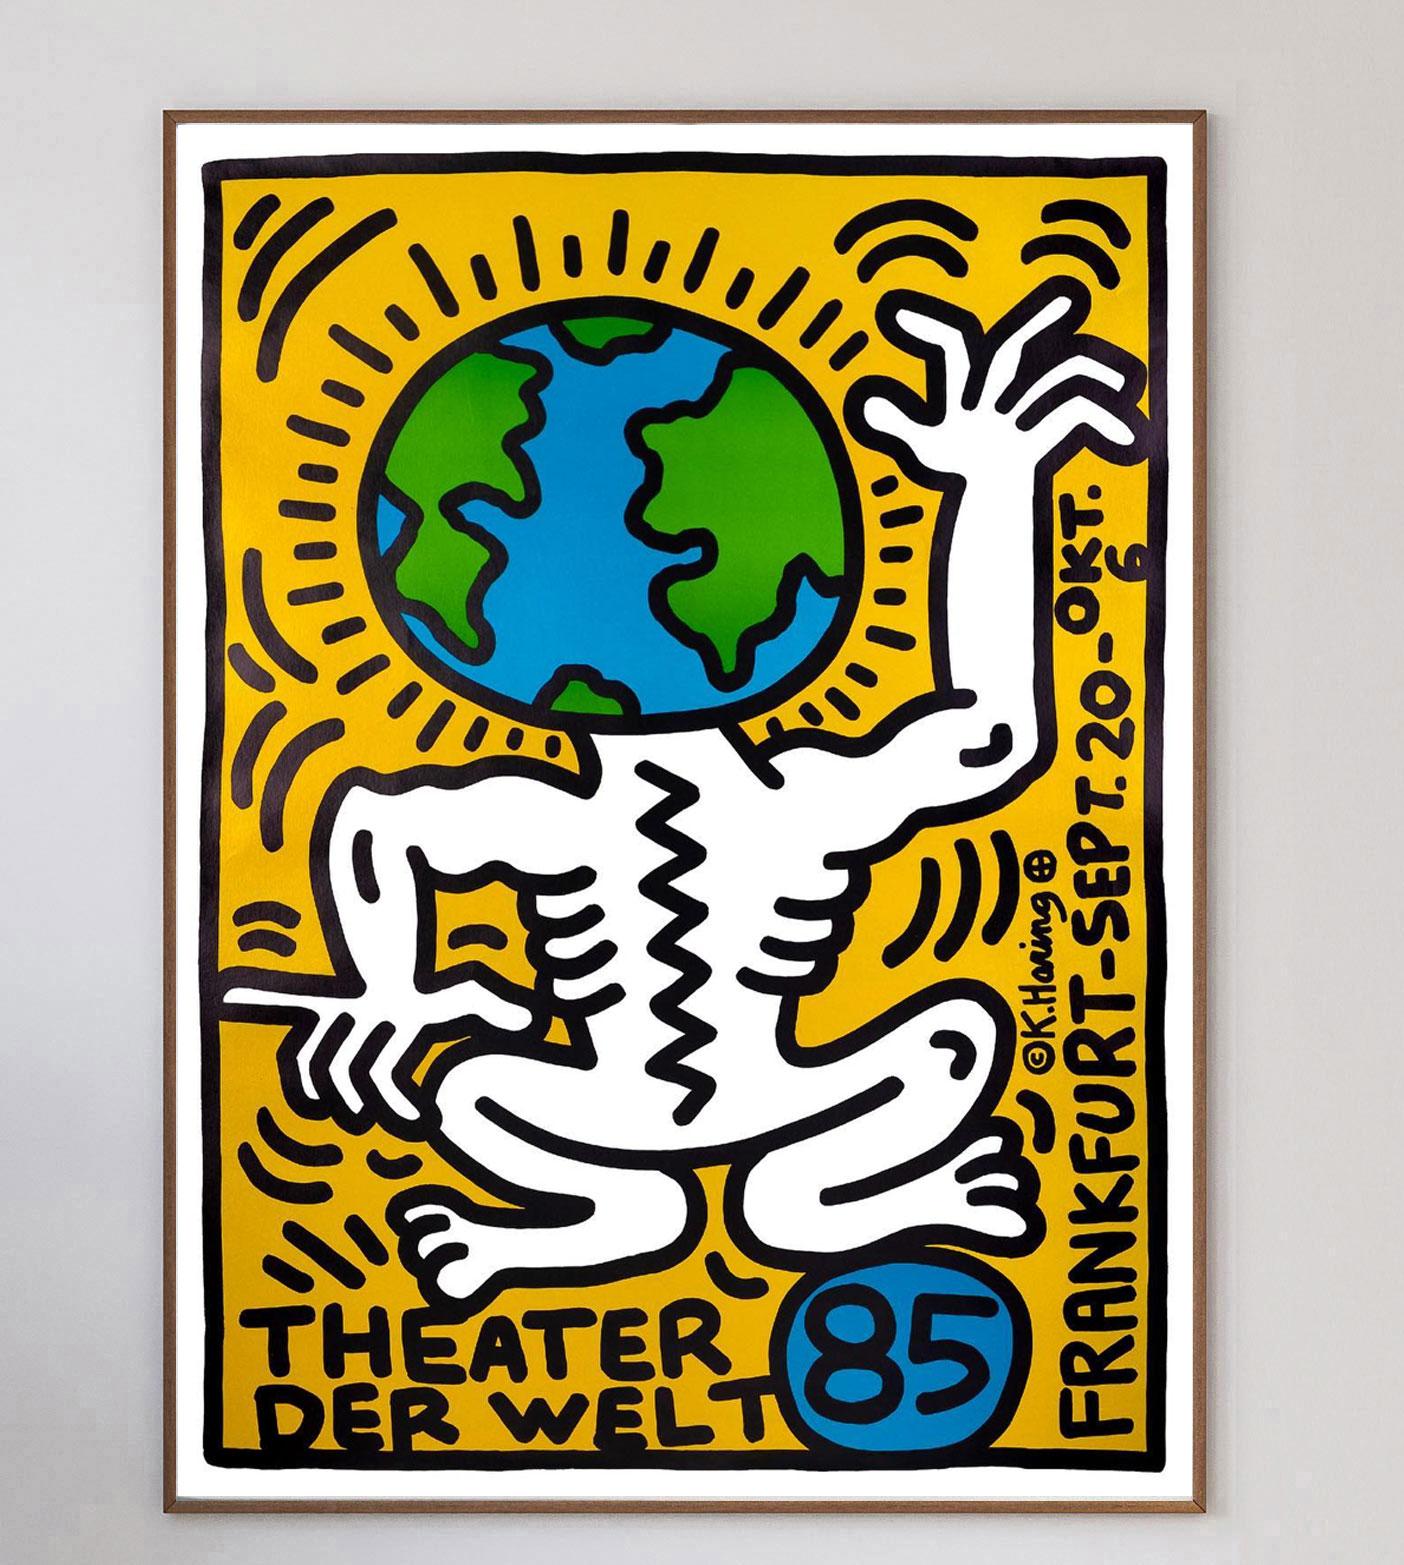 Beautiful poster designed by Keith Haring for the 1985 Theater der Welt in Frankfurt. The International Theatre Festival has been held every 3 years since 1993 however it was slightly more erratic before this, with the last event before the 1985